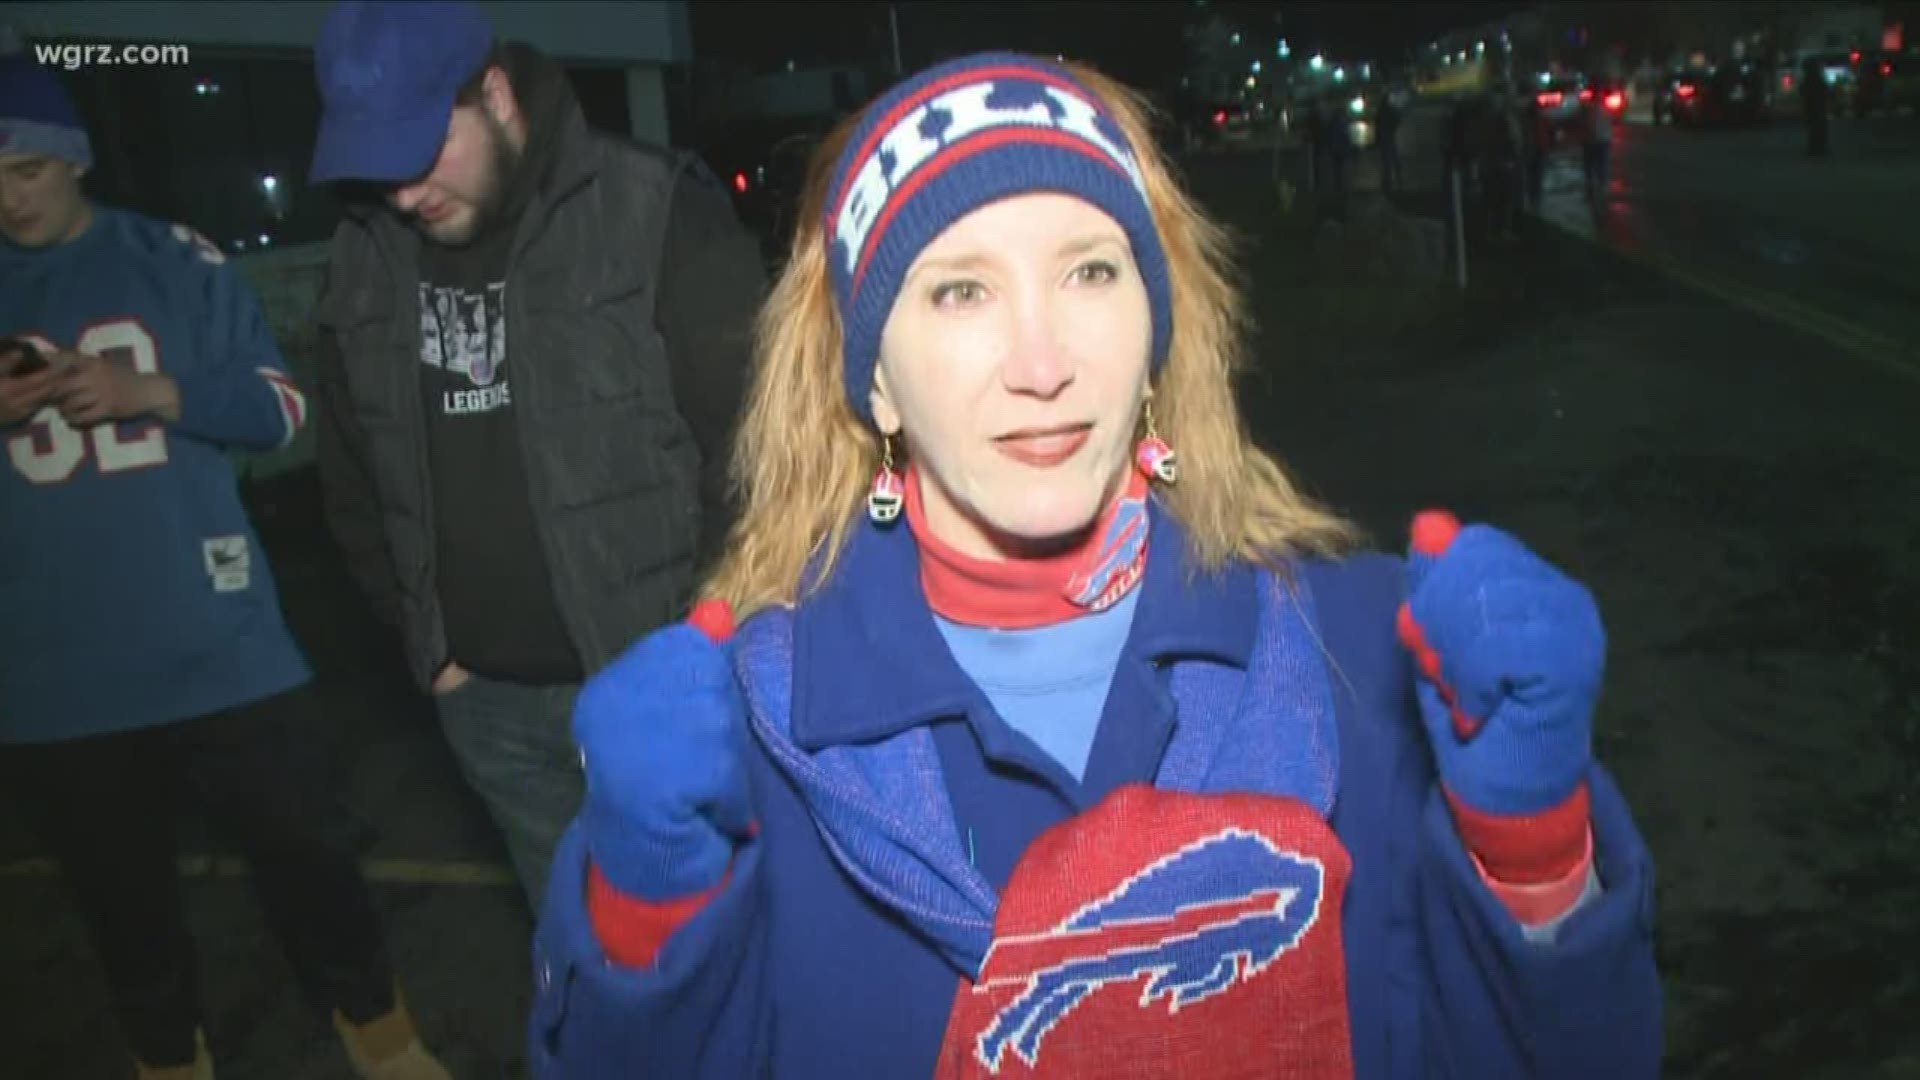 The Bills secured a winning record with their victory over Dallas on Thursday and fans were very thankful